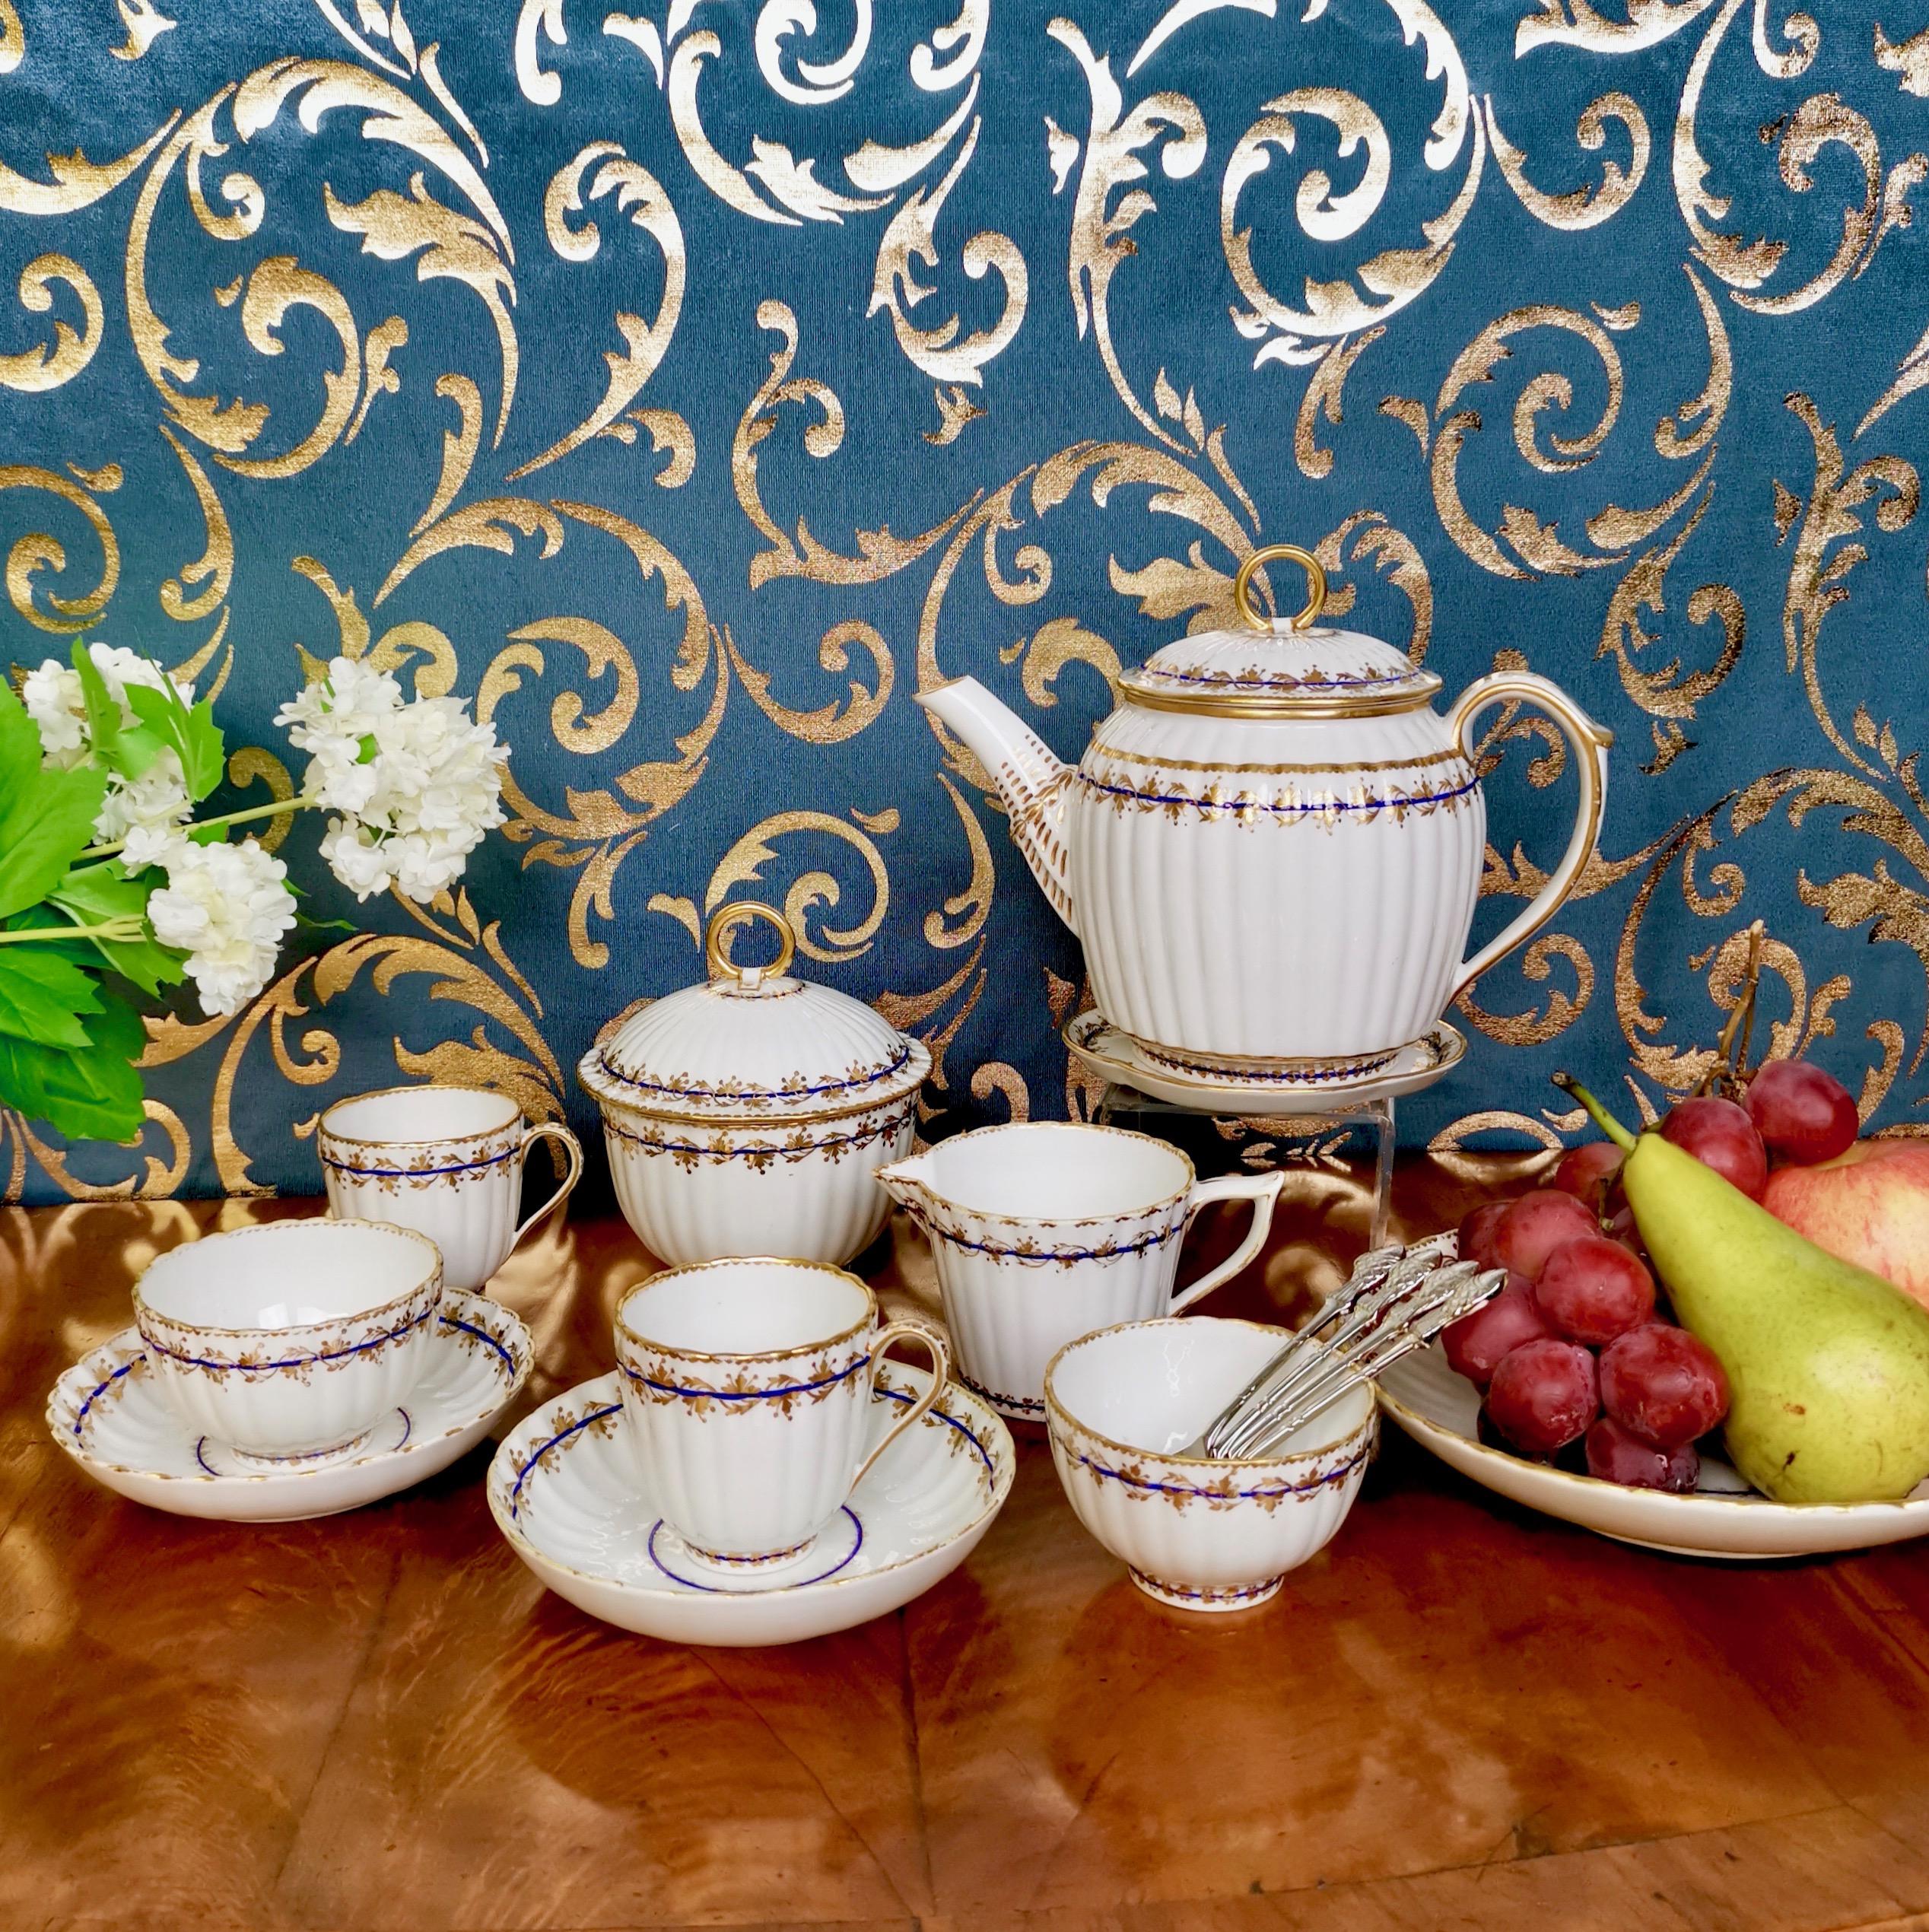 This is a very stunning porcelain breakfast set (also called Tête à Tête) made by the Crown Derby Porcelain Company some time between 1782 and 1800. It is made of white porcelain with a sophisticated gilt decoration. The set consists of a teapot